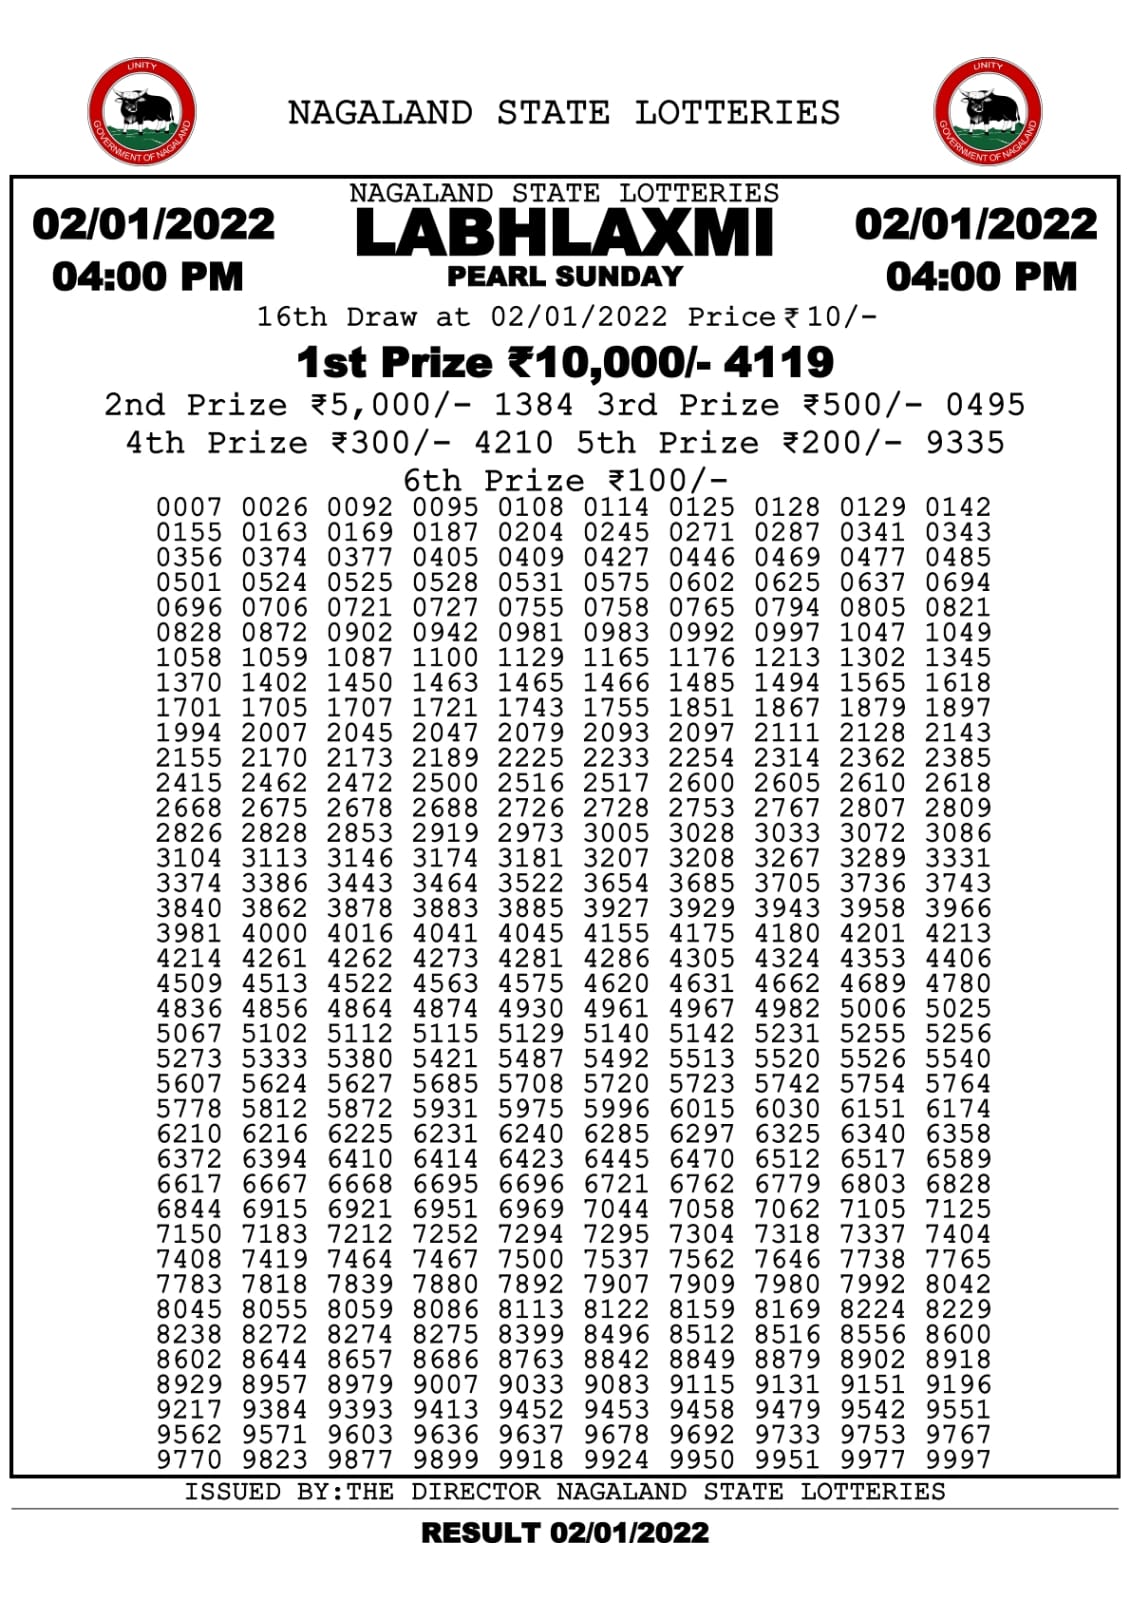 Labhlaxmi 4.00pm Lottery Result 02.01.2022